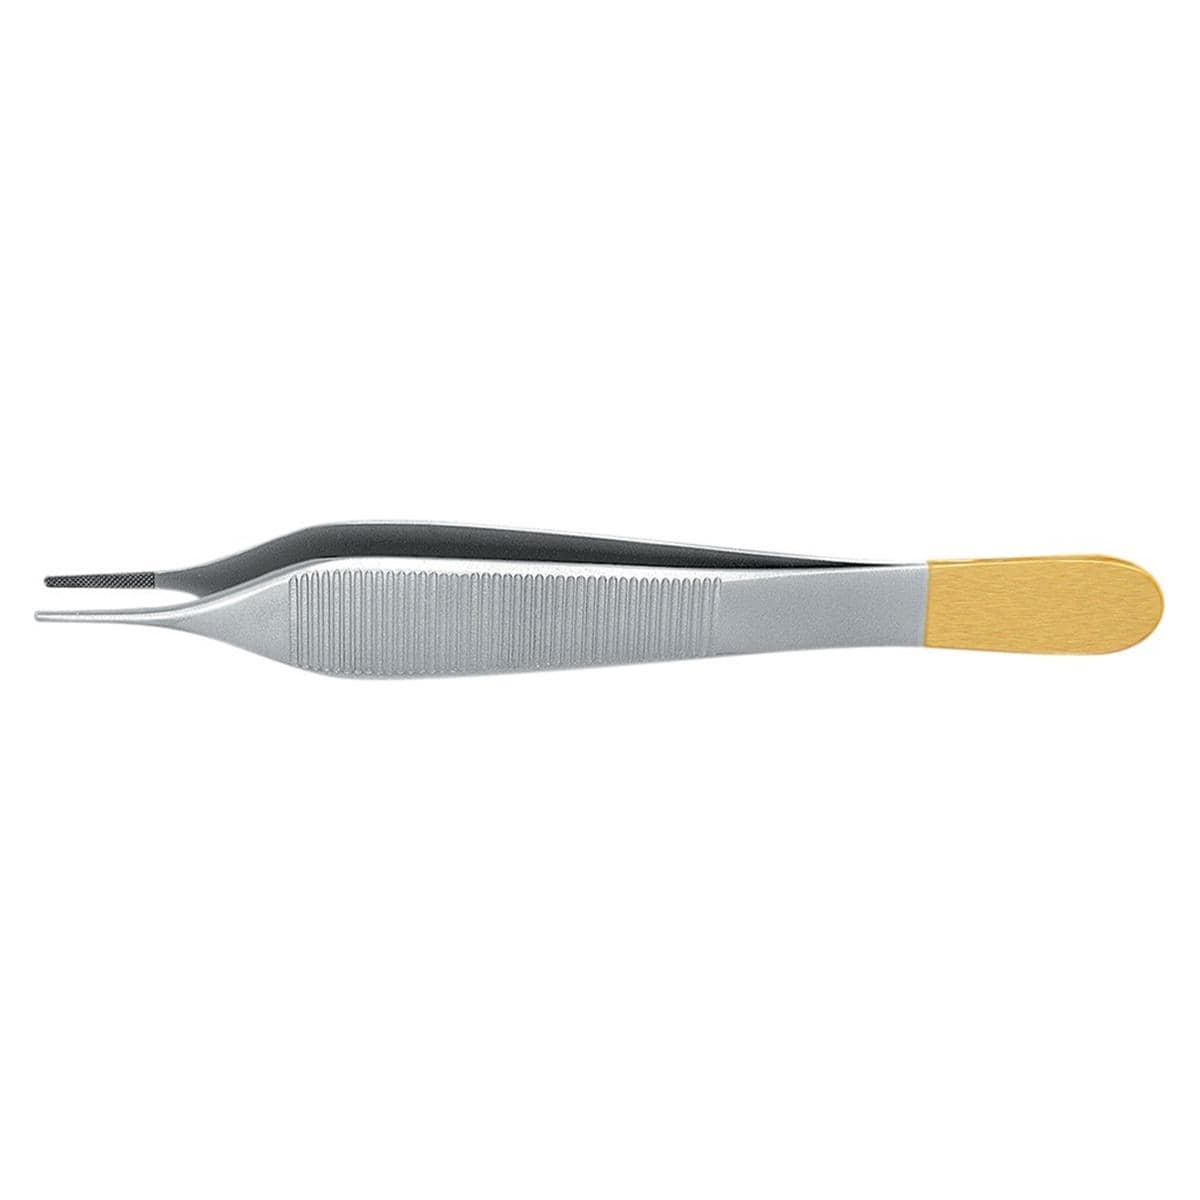 Prcelles chirurgicales Adson Perma Sharp - TP5041, 12 cm